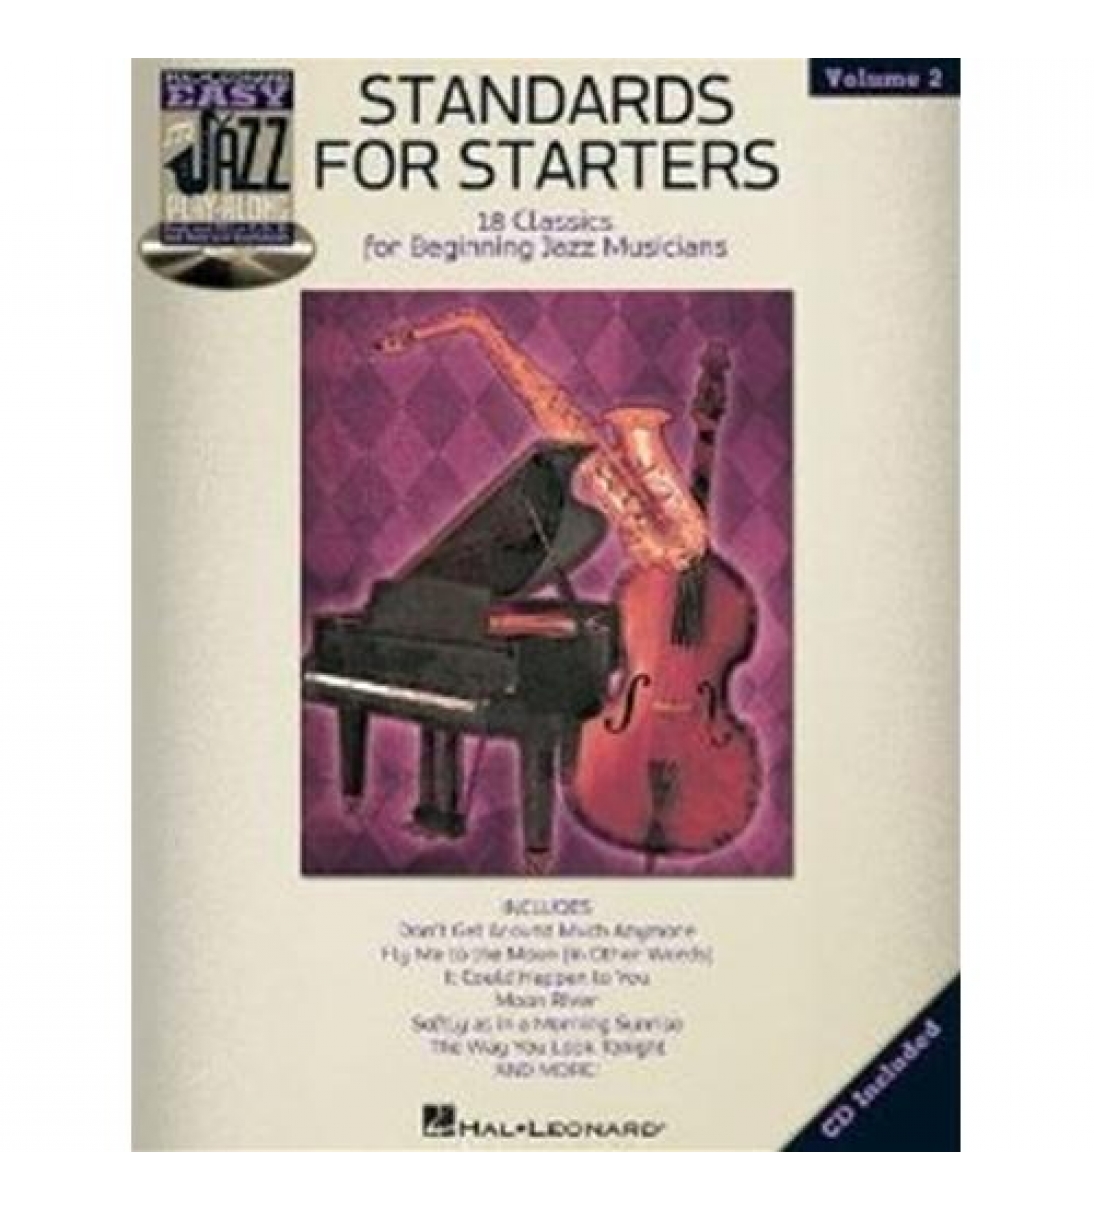 Easy jazz play along - Vol. 2: Standards for starters - Book con CD